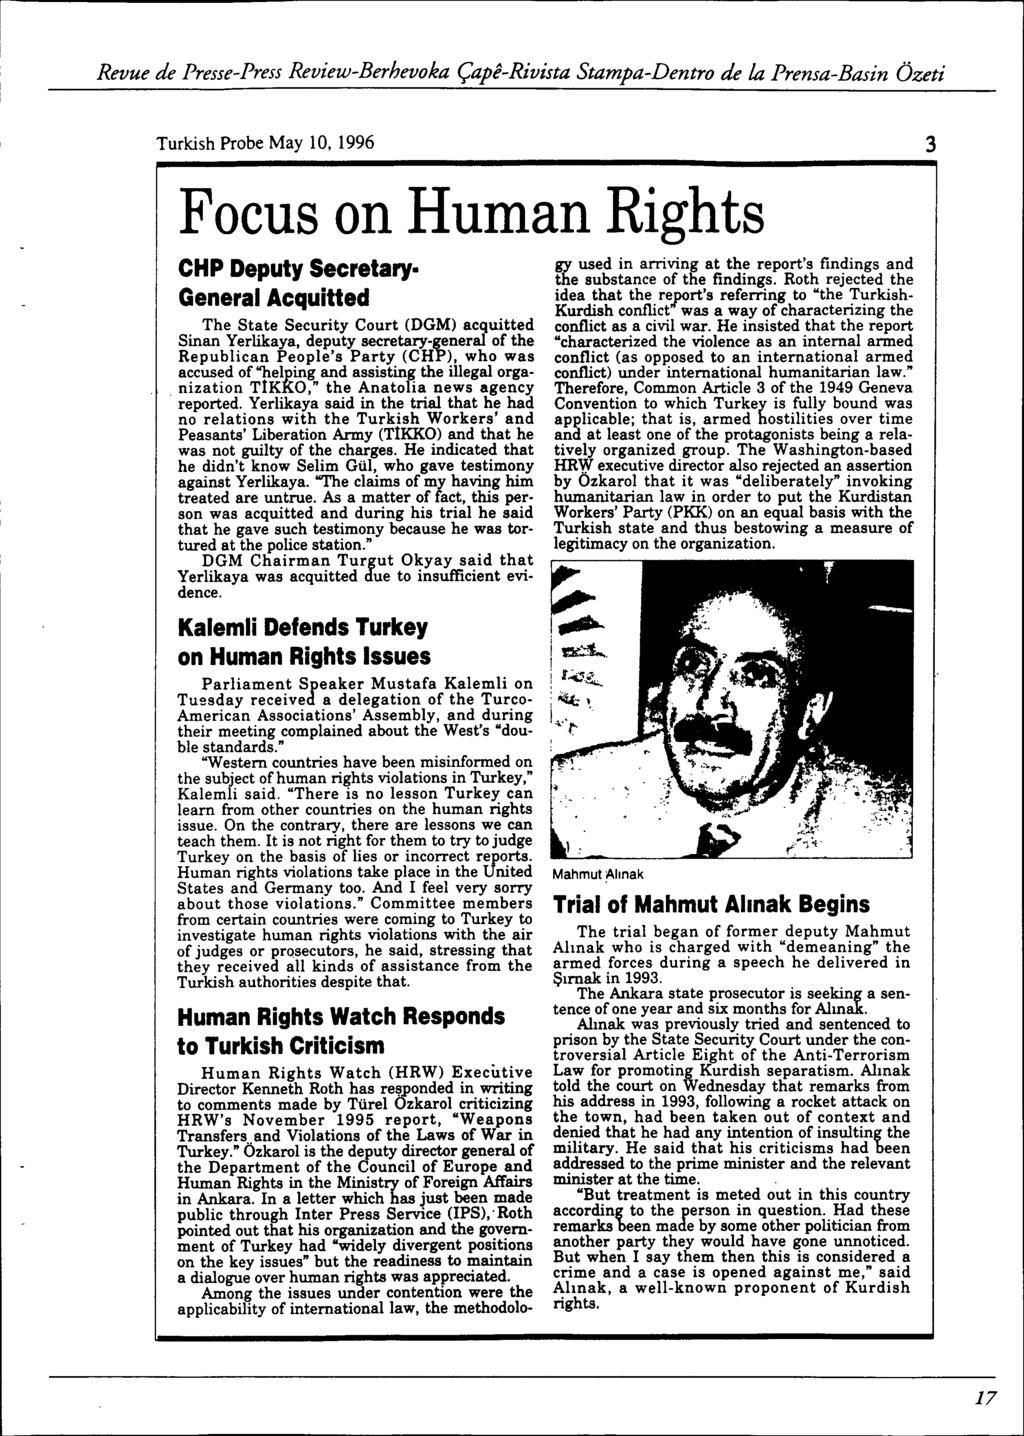 Turkish Probe May 10, 1996 Focus on Human Rights CHP Deputy Secretary- General Acquitted The State Security Court (DGM) acquitted Sinan Yerlikaya, deputy secretary-general of the Republican People's